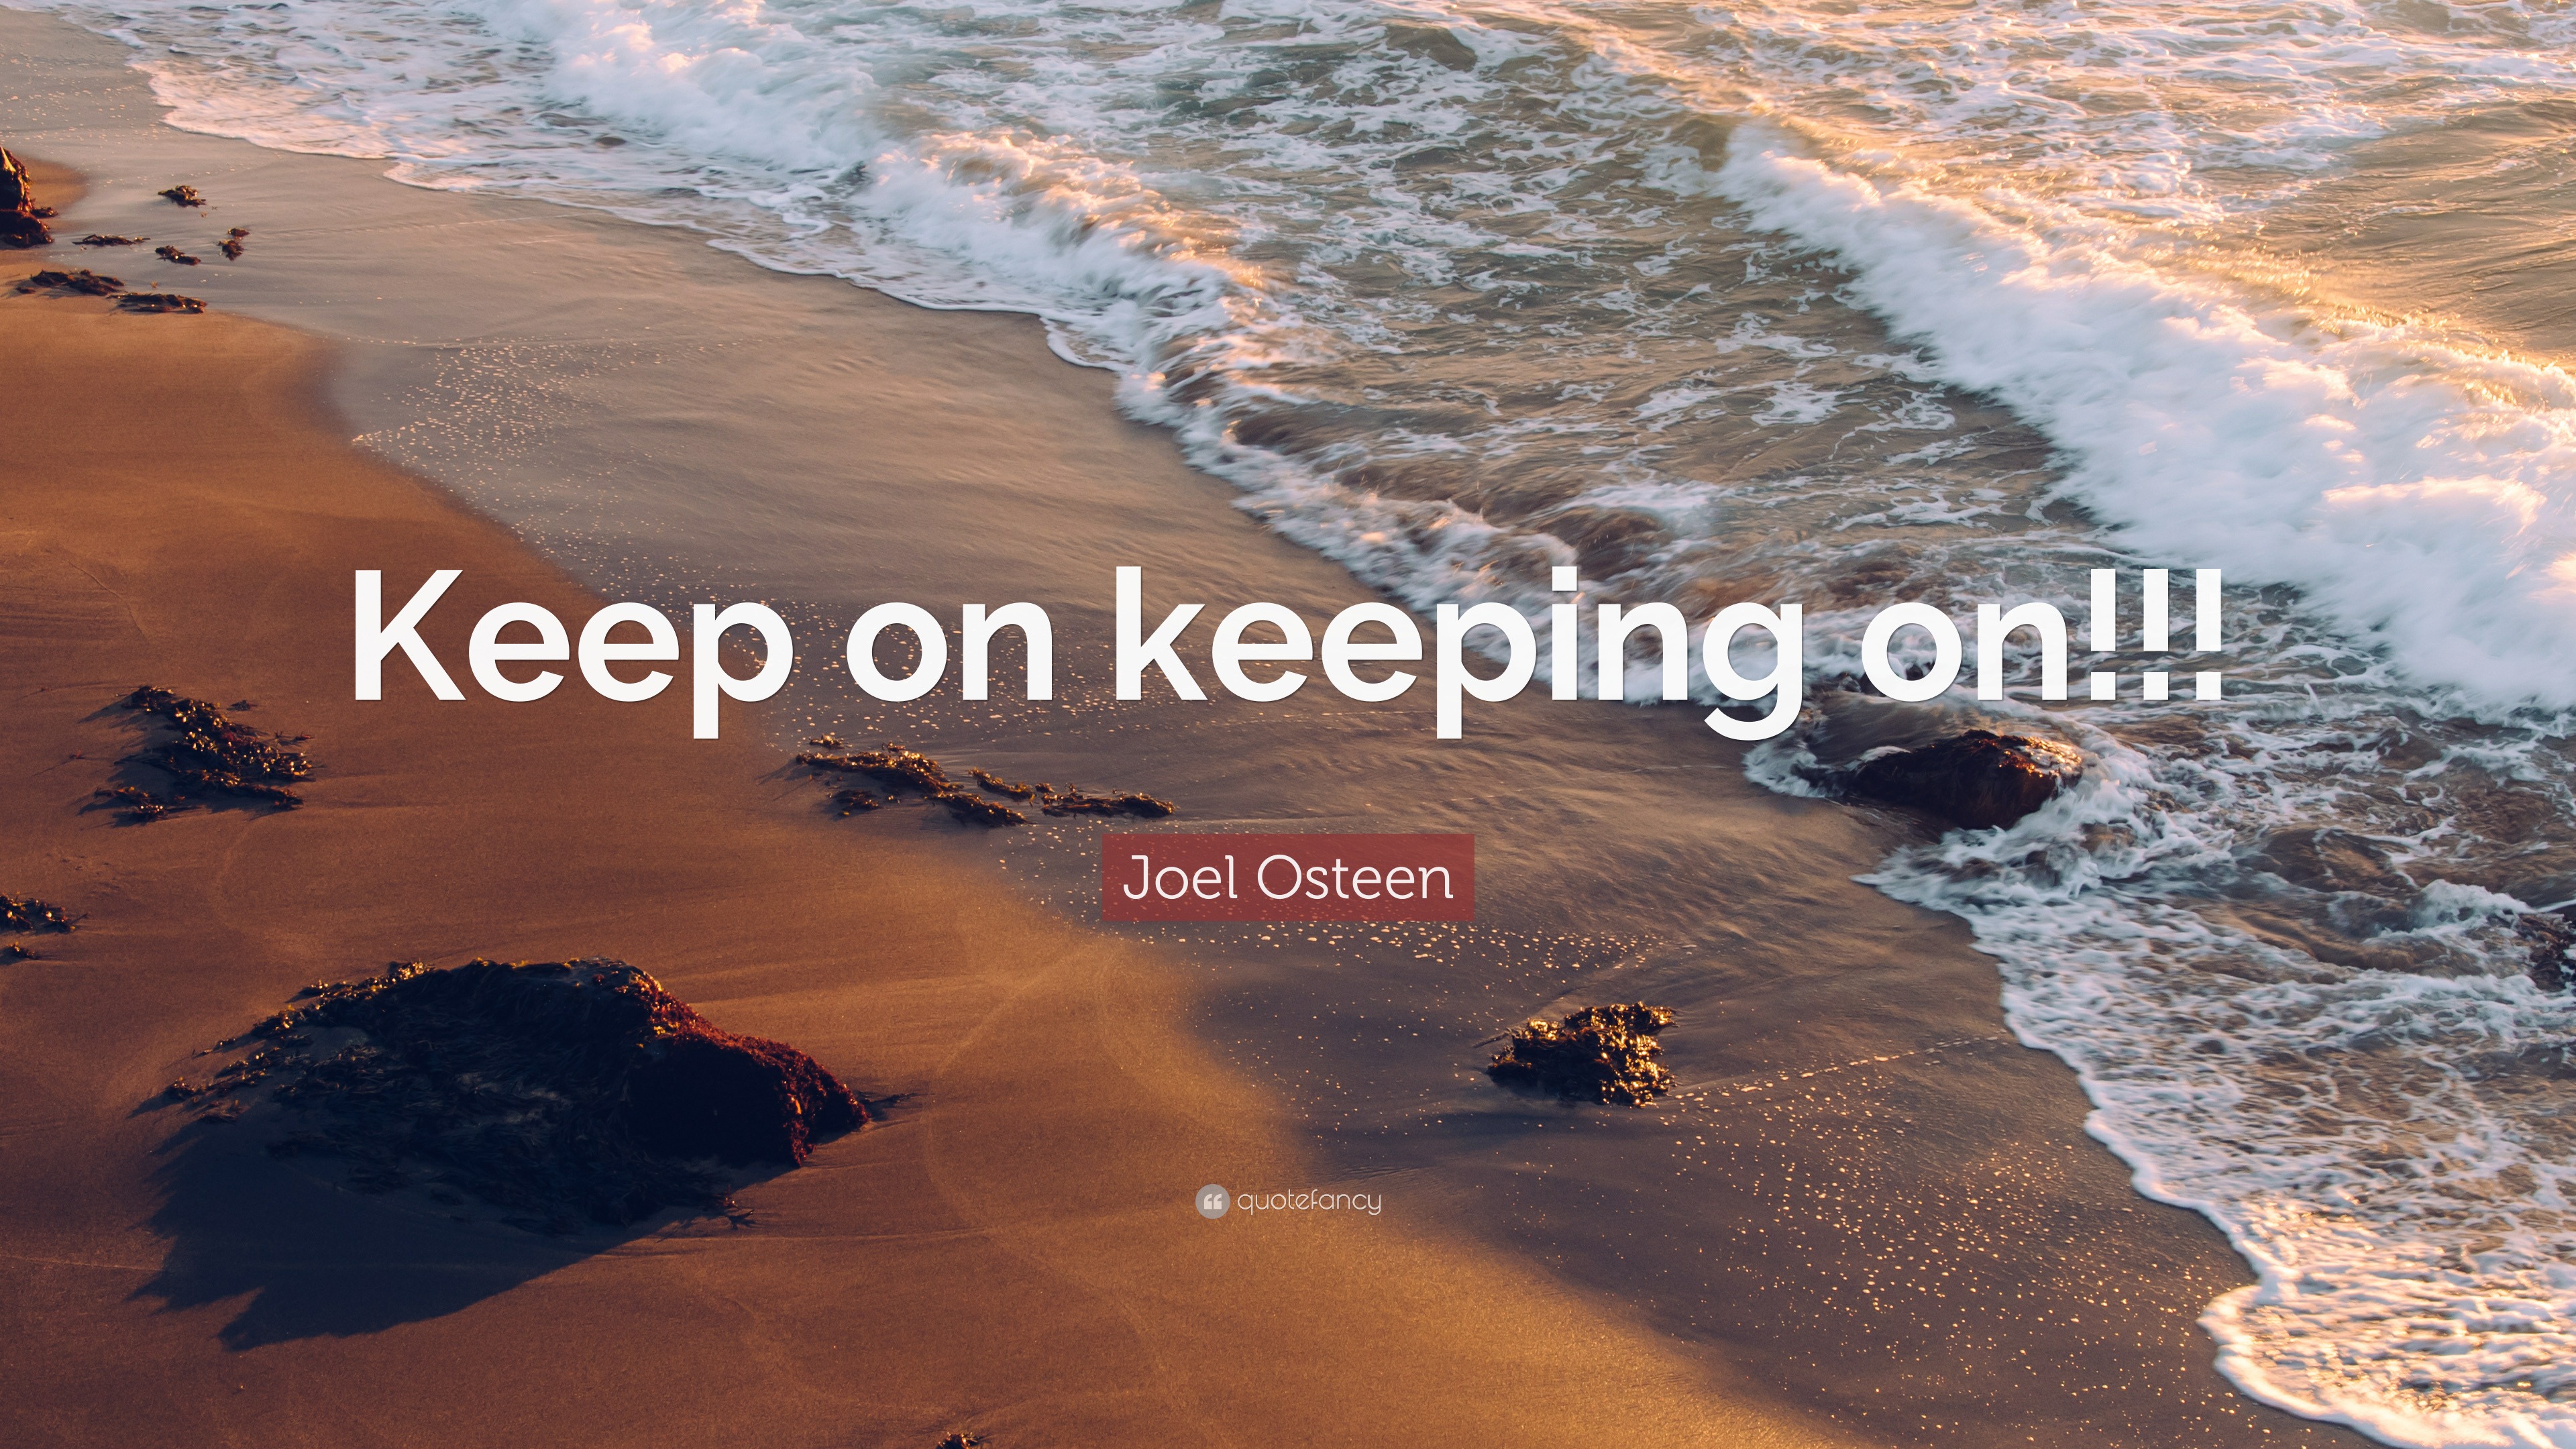 Joel Osteen Quote: “Keep on keeping on!!!”